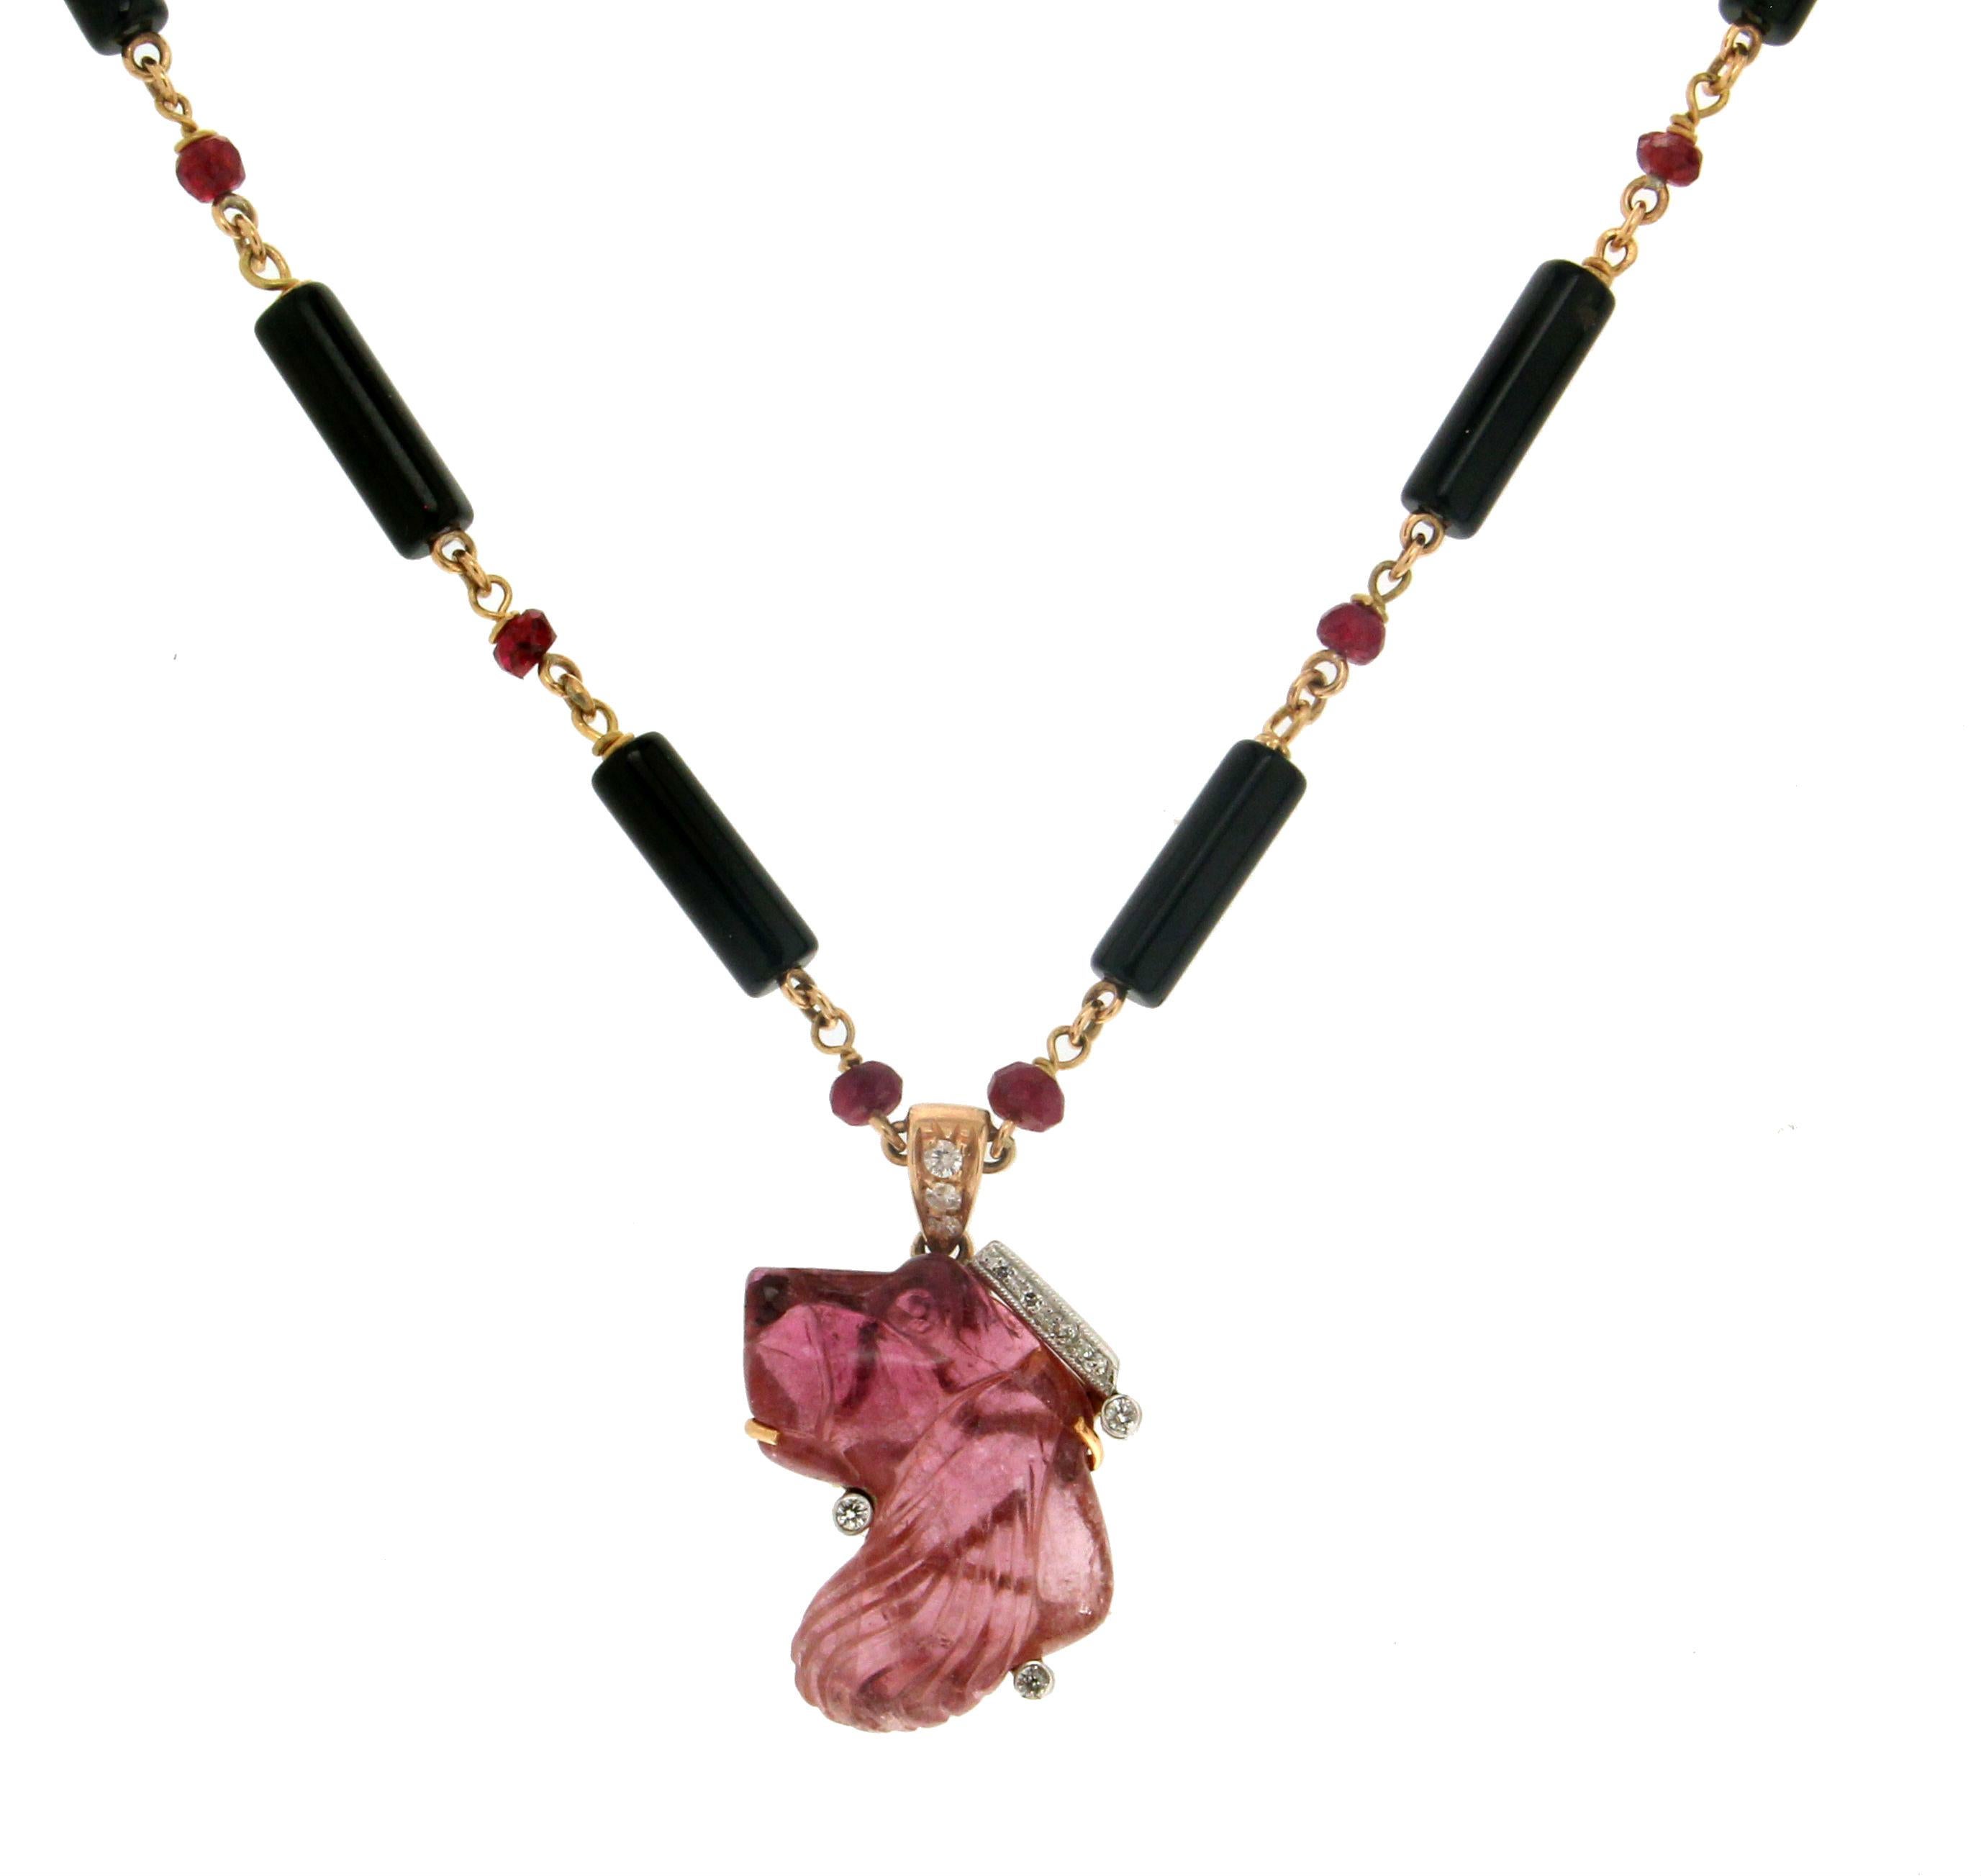 Tourmaline dog yellow and white gold 18 carat mounted with onyx barrels and diamonds pendant necklace

Necklace weight 12.10 grams
Diamonds weight 0.05 carat
Neckalce length 41 cm